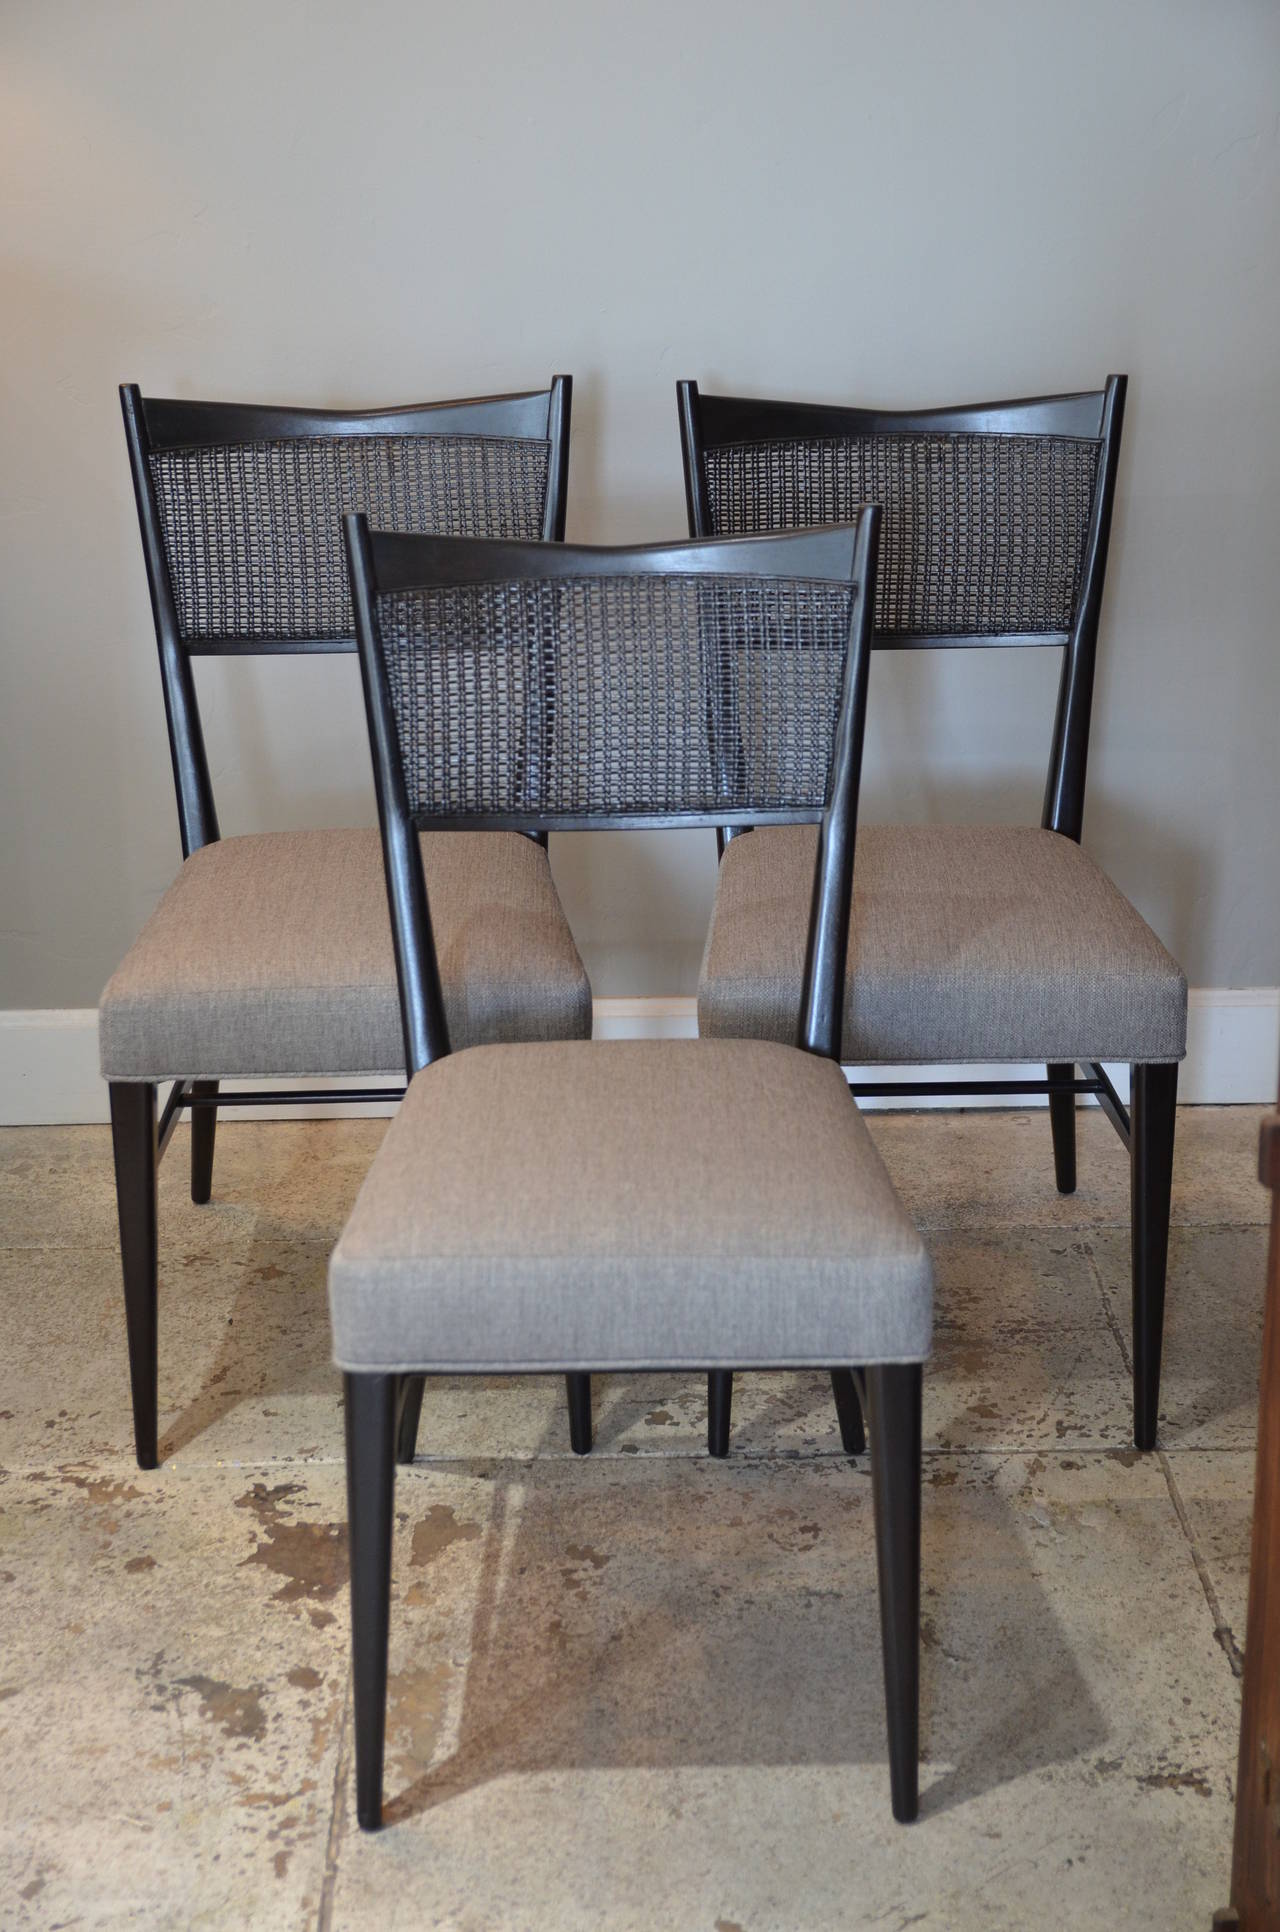 Set of three chic ebonized caned chairs by Paul McCobb. From the Connoisseur Collection. Restored and reupholstered.